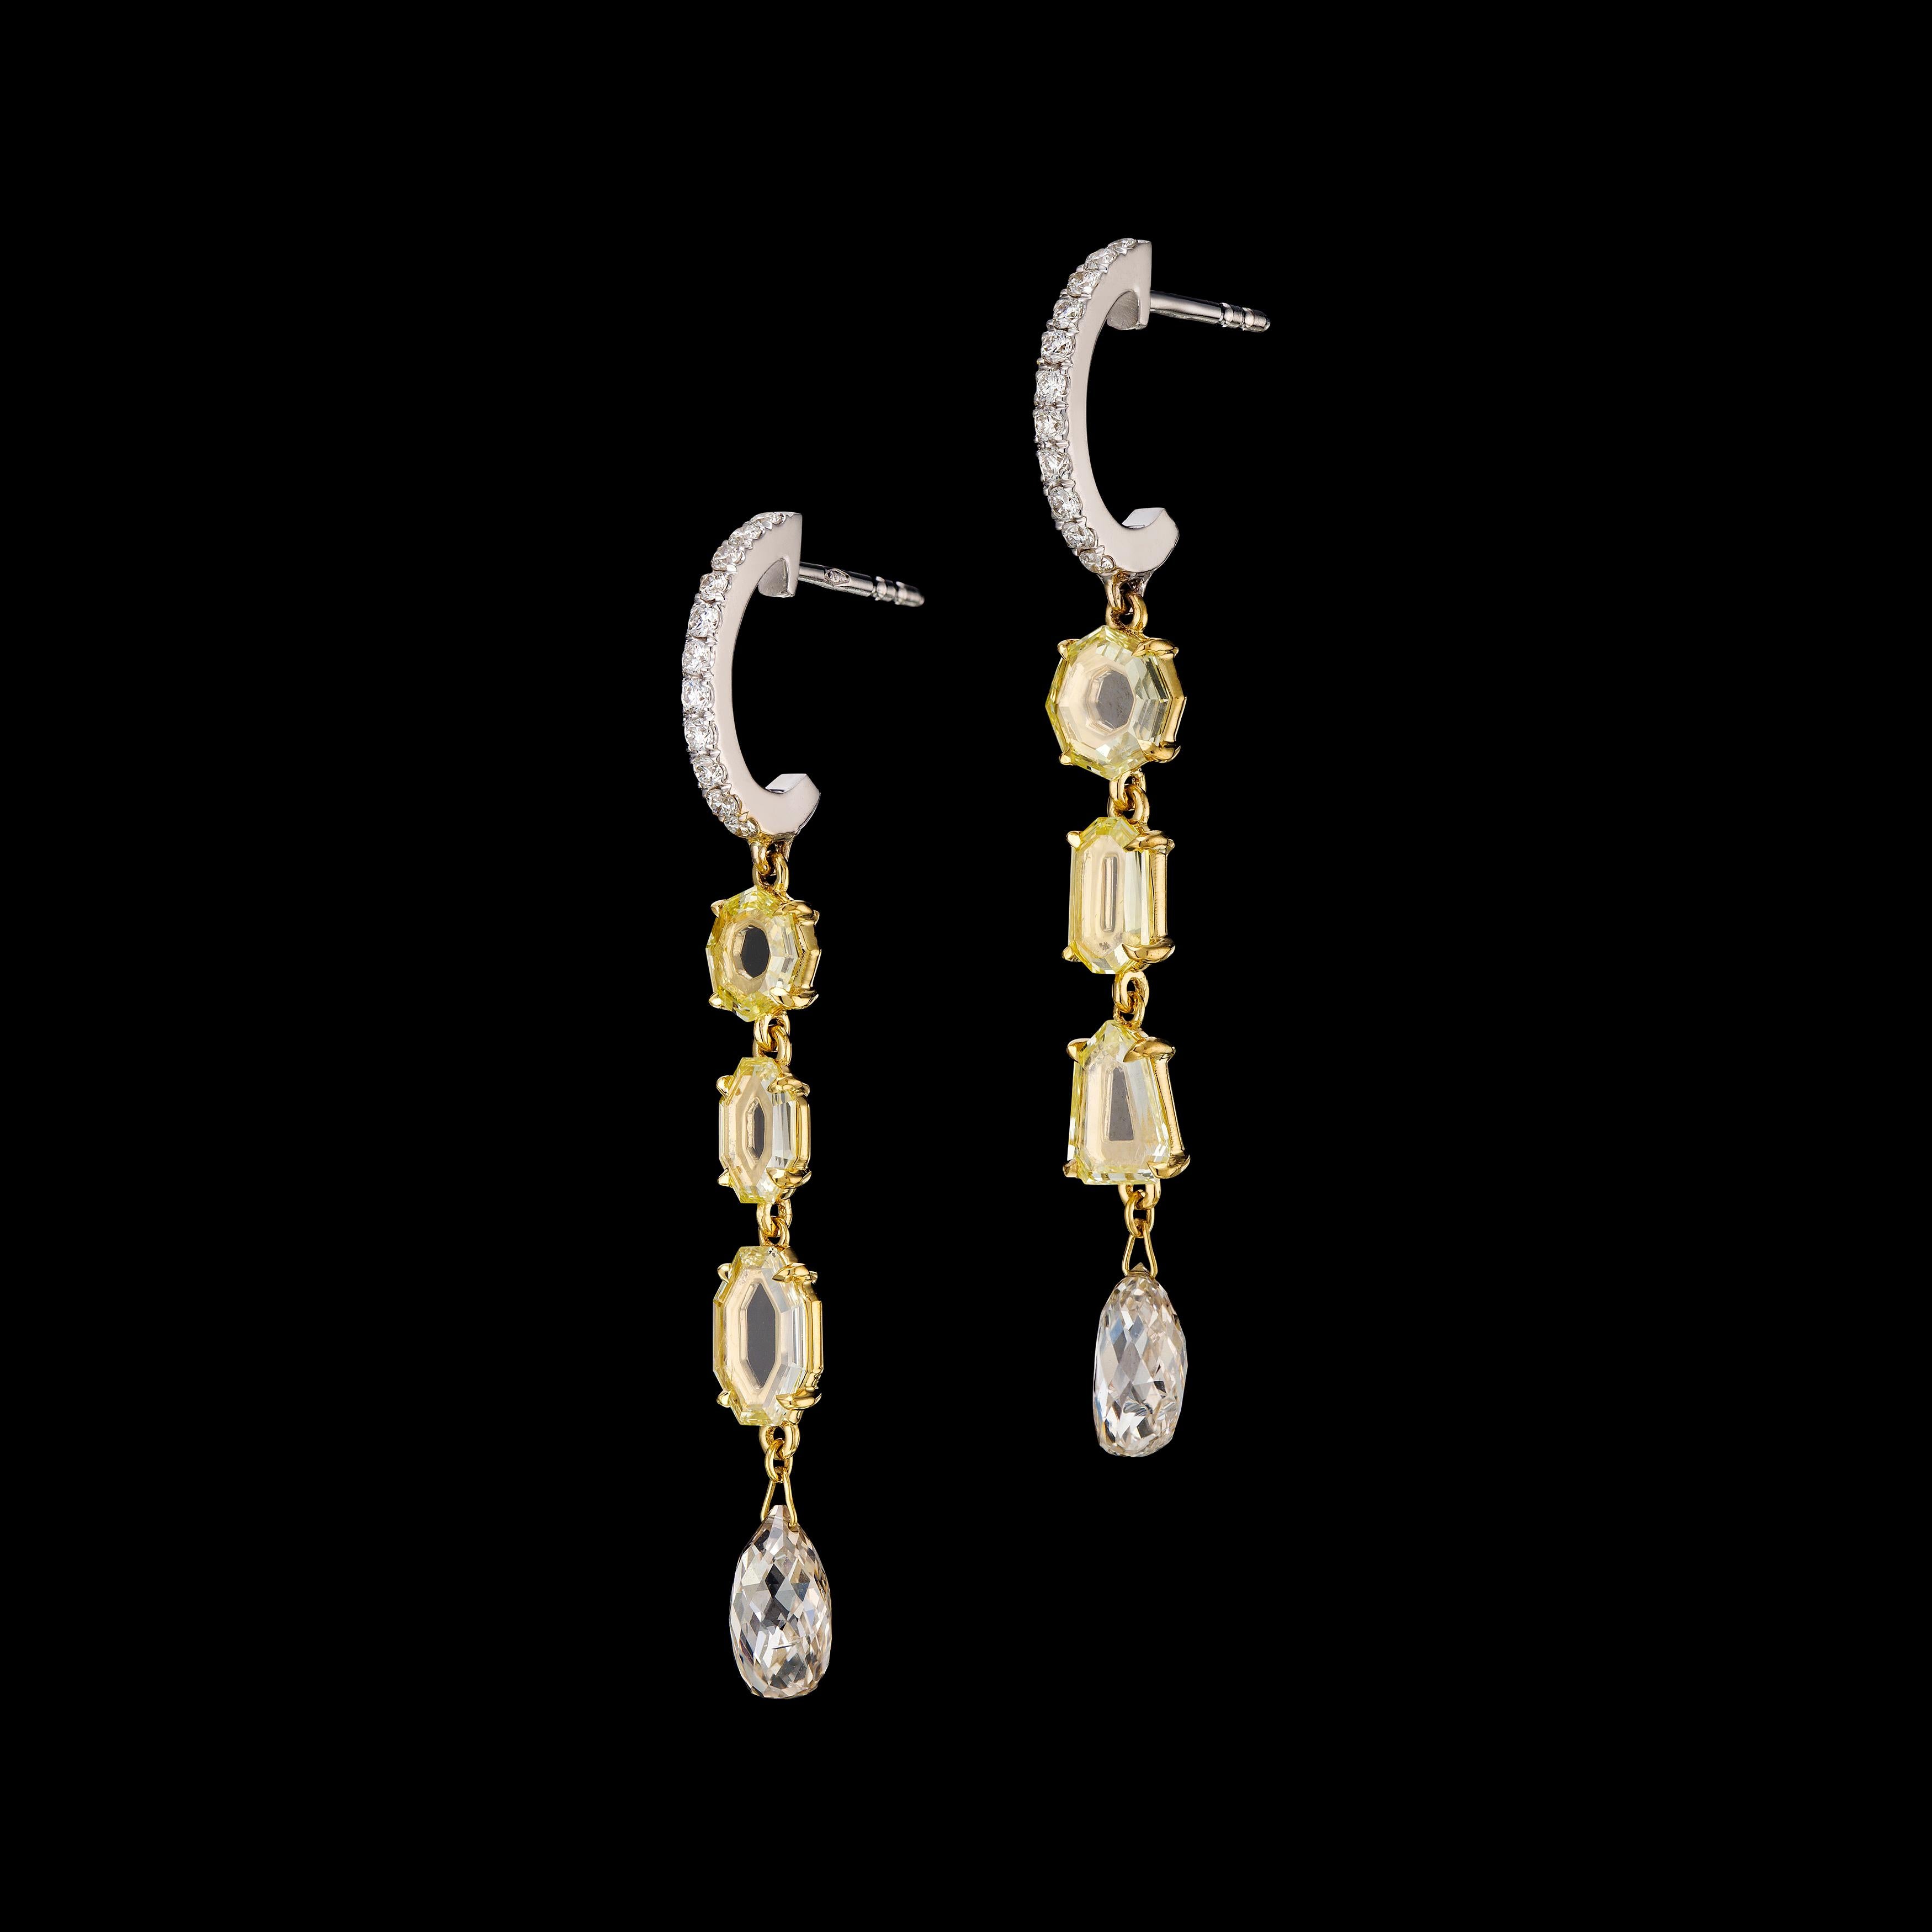 Rose Cut 3.83 Carat Rosecut Briolet and Round Diamonds Earrings in 18 Karat Gold For Sale